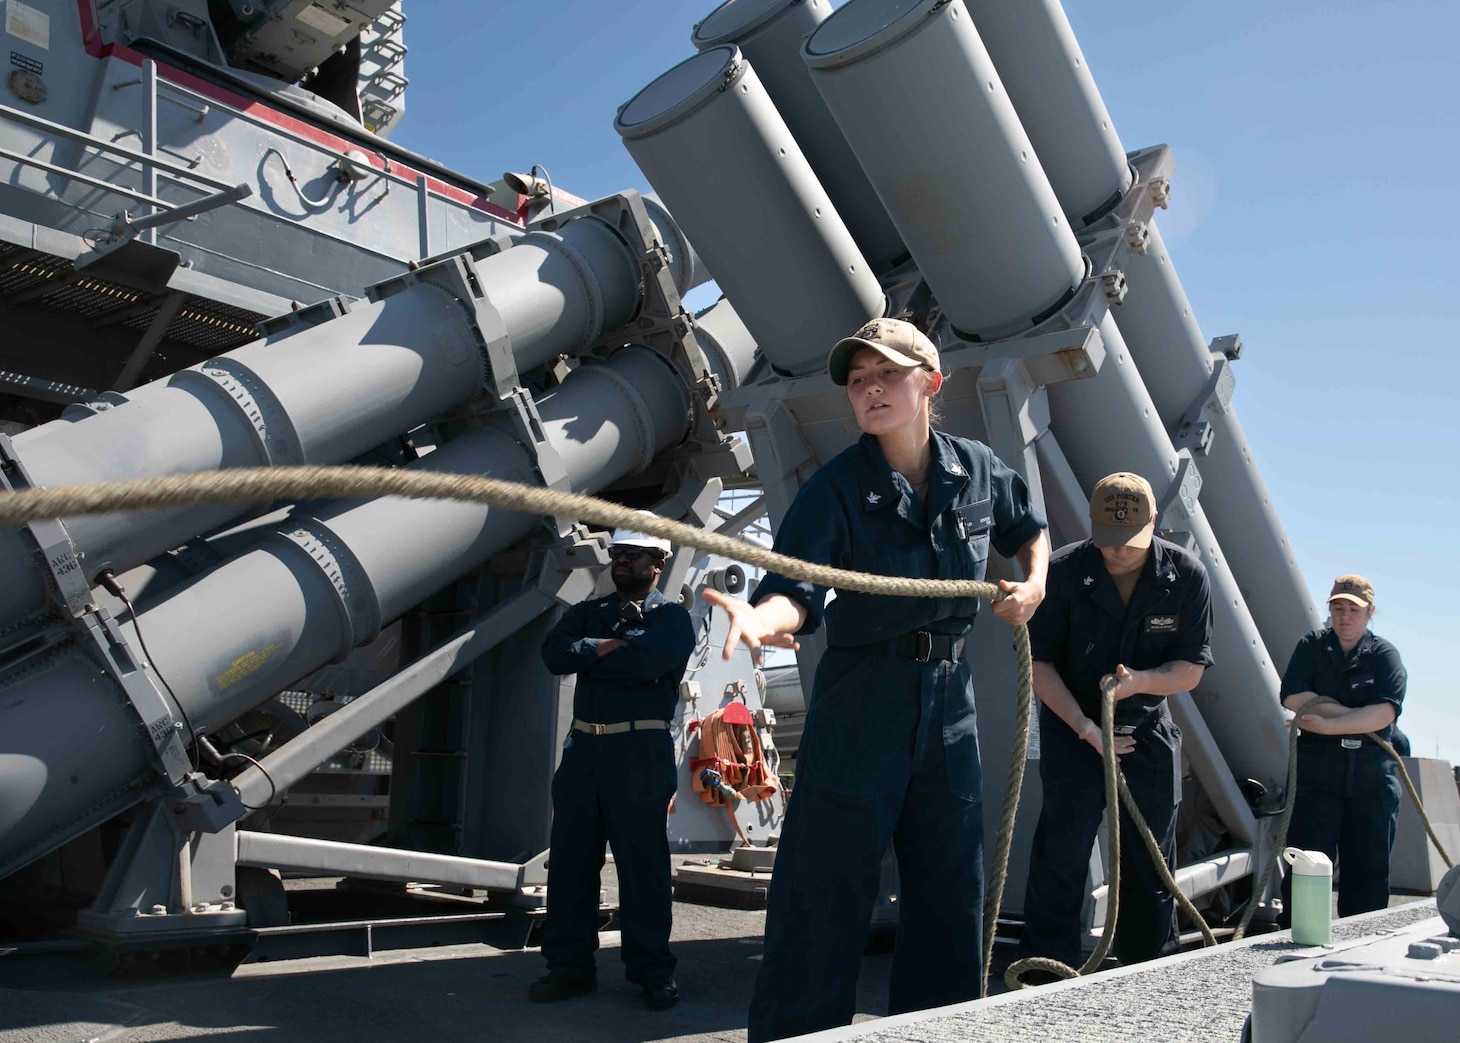 Interior Communications Electrician 3rd Class Hailey Servedo pulls the mooring lines aboard the Arleigh Burke-class guided-missile destroyer USS Porter (DDG 78), May 10, 2022. Porter is on a scheduled deployment in the U.S. Sixth Fleet area of operations in support of U.S., Allied and partner interest in Europe and Africa.